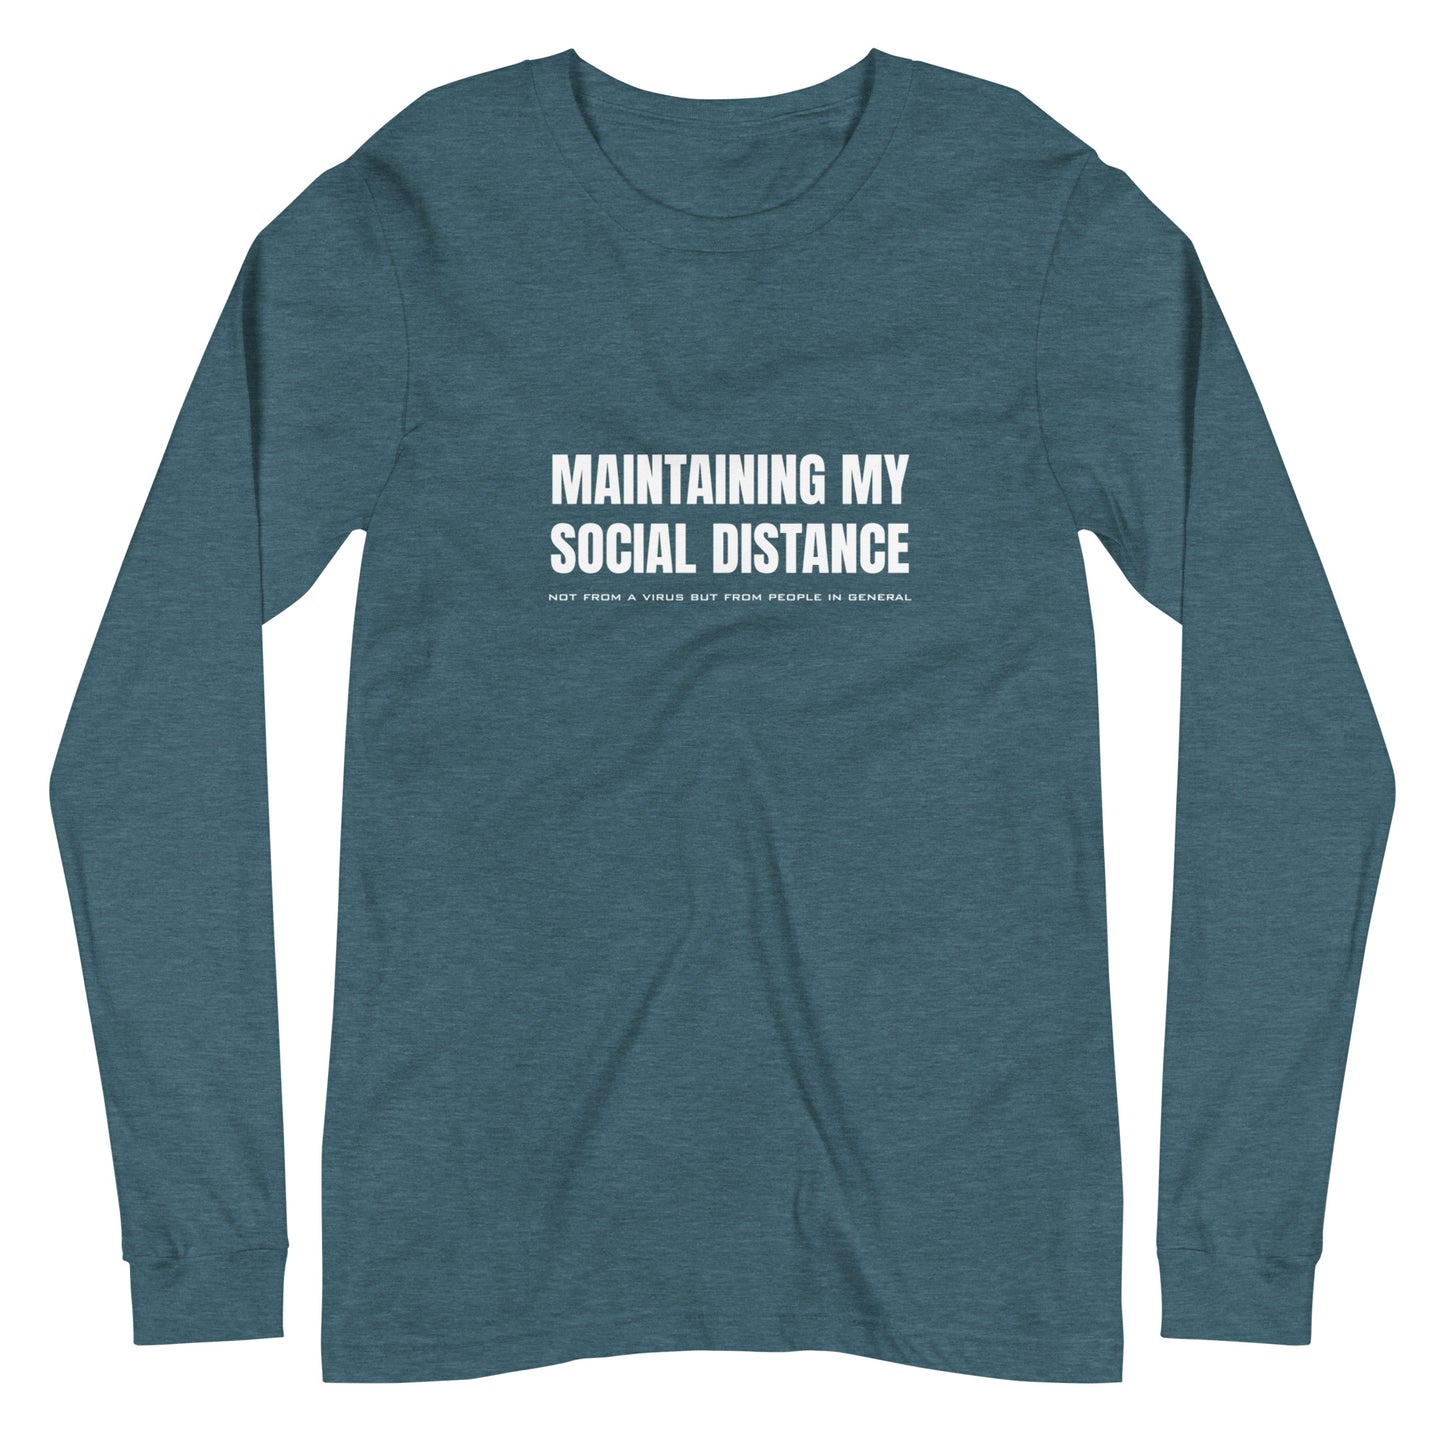 Heather Deep Teal long sleeve t-shirt with white graphic: "MAINTAINING MY SOCIAL DISTANCE not from a virus but from people in general"